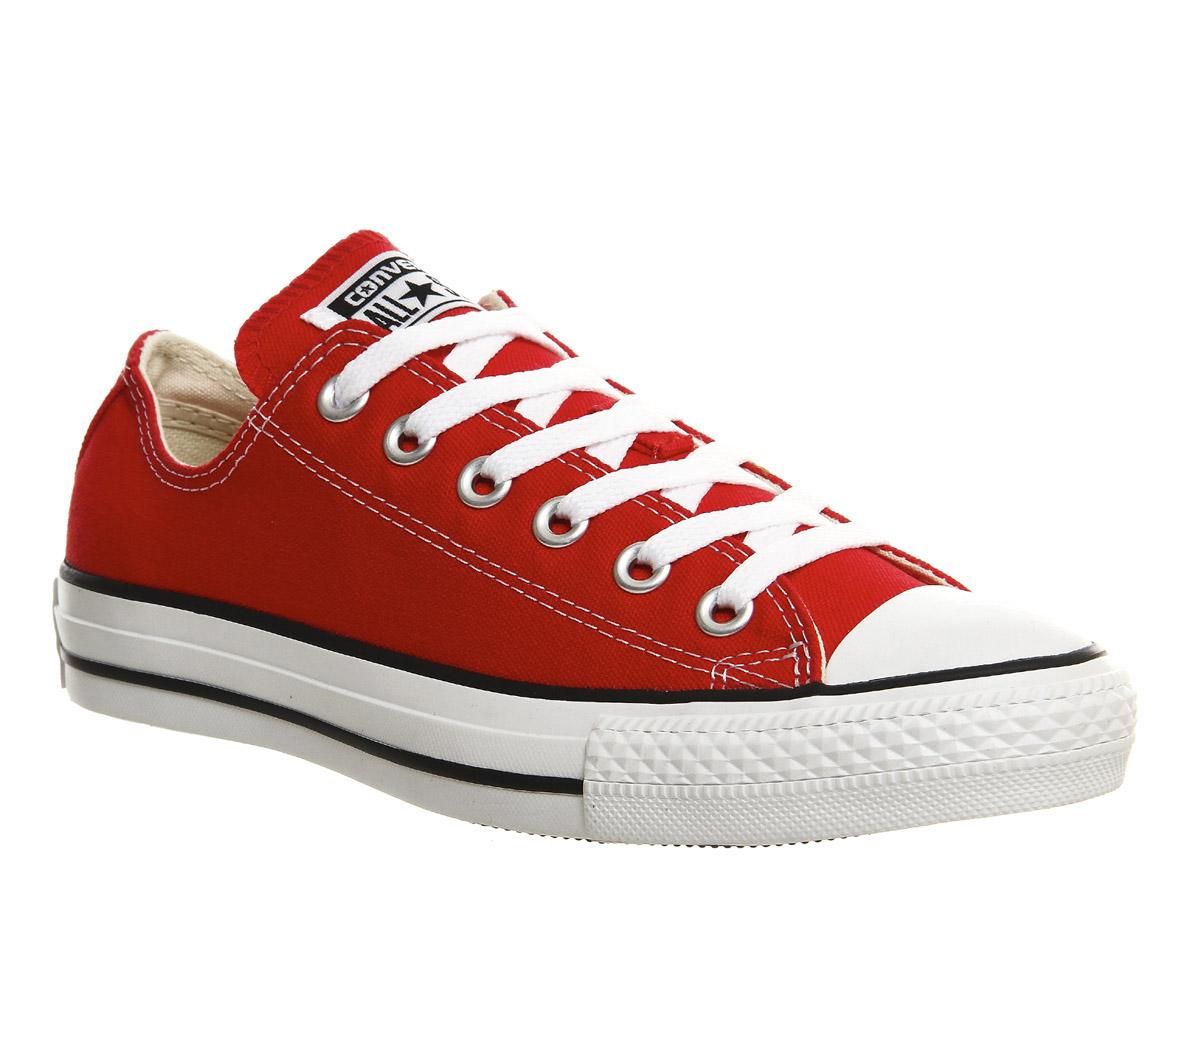 red low top converse womens